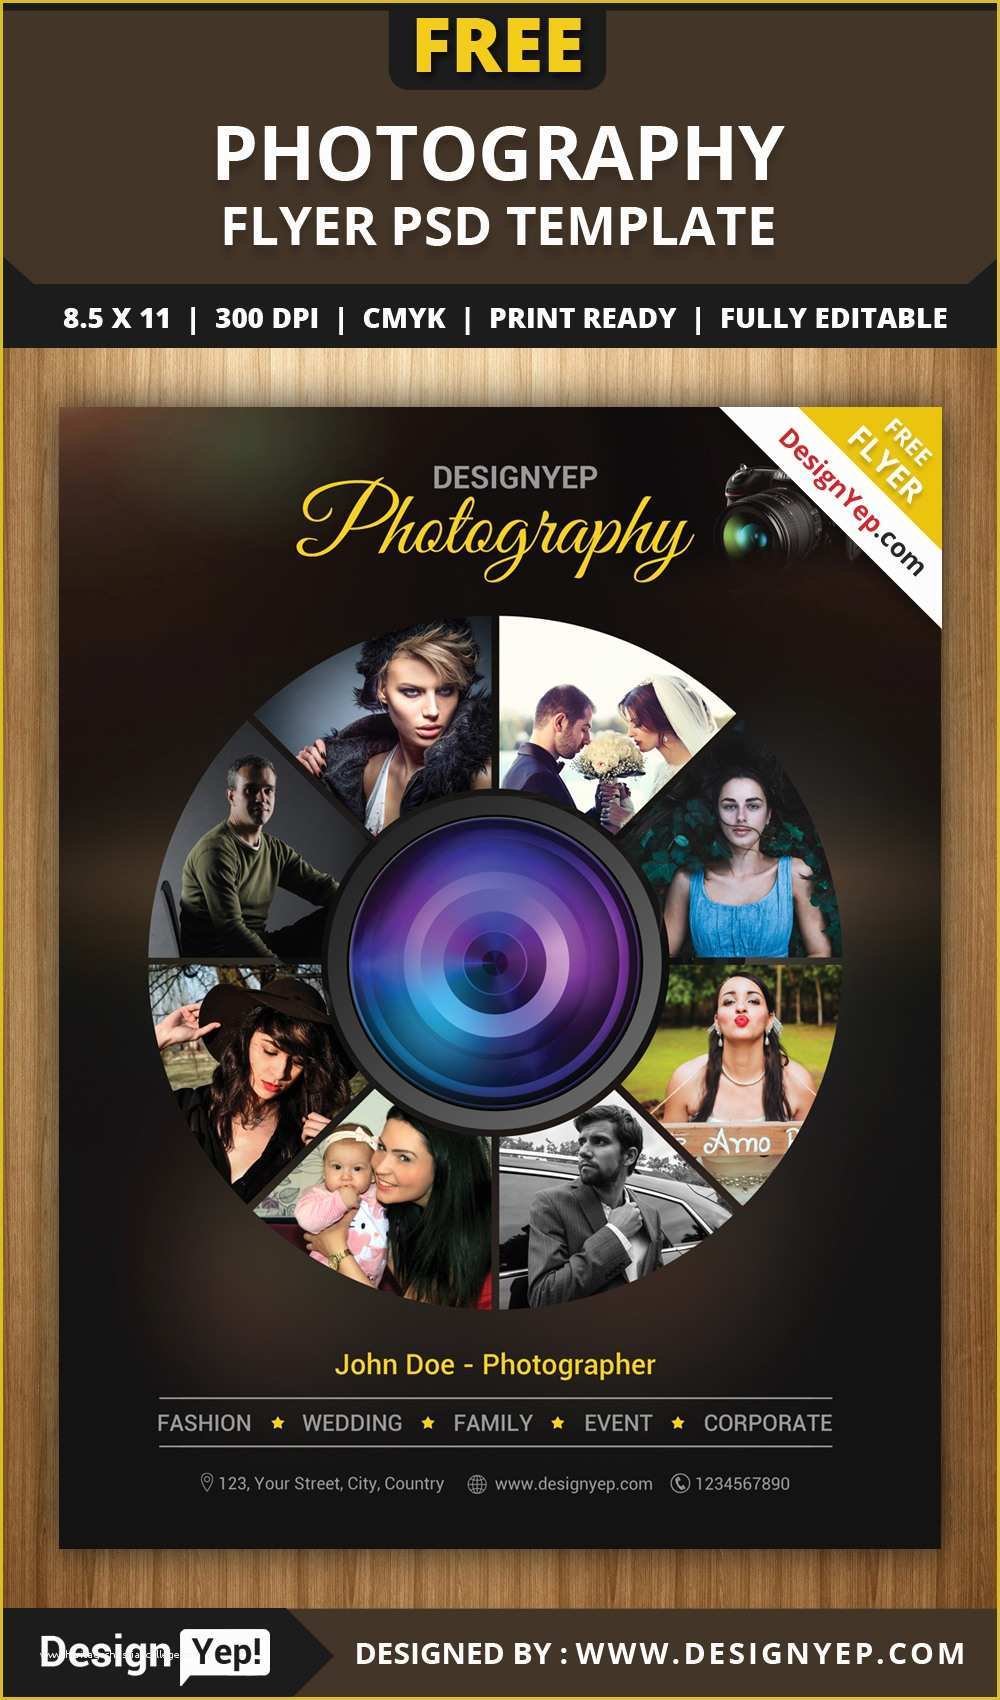 Photography Flyer Template Free Of Free Graphy Flyer Psd Template Designyep